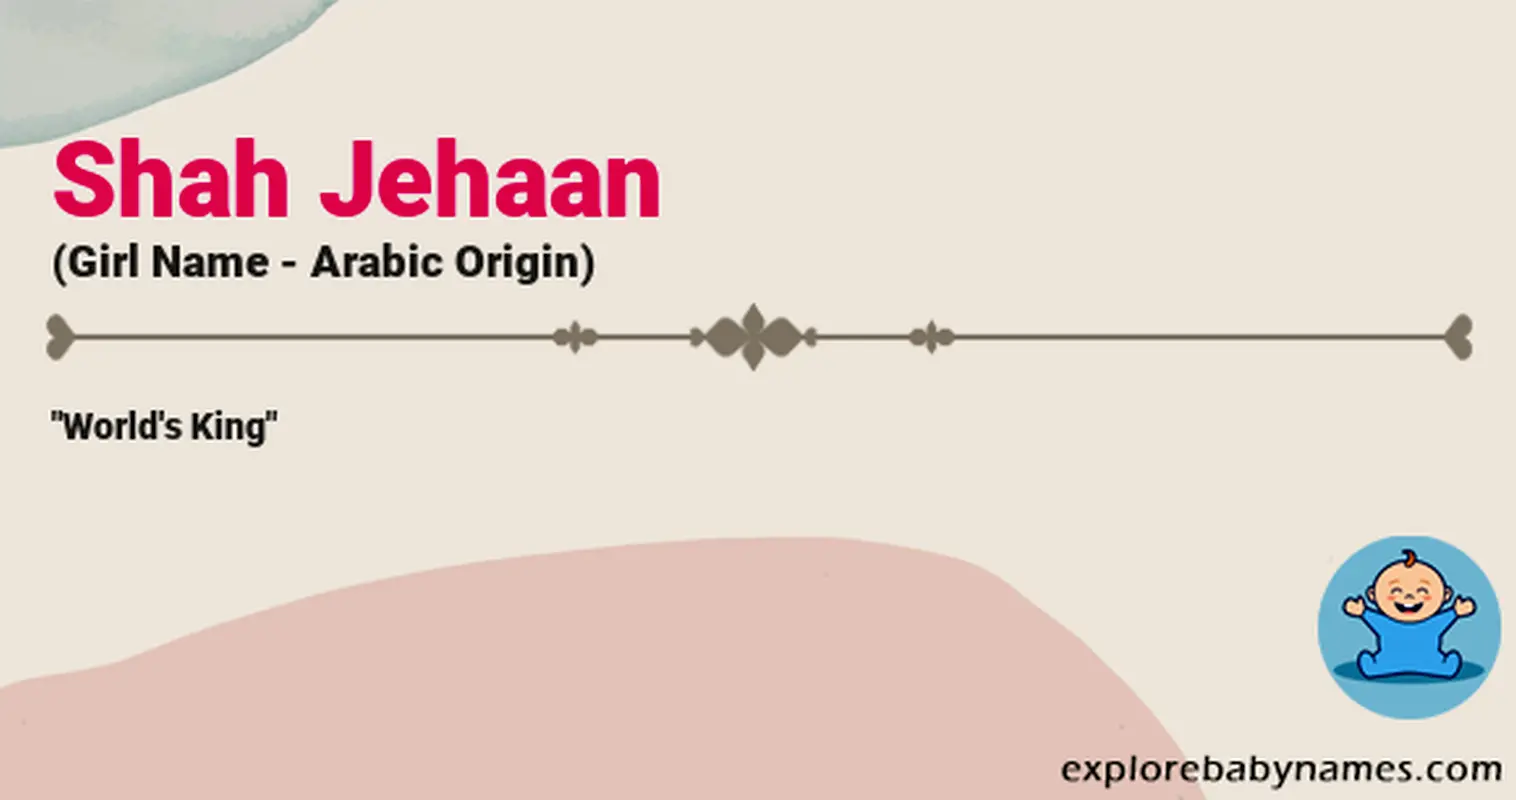 Meaning of Shah Jehaan